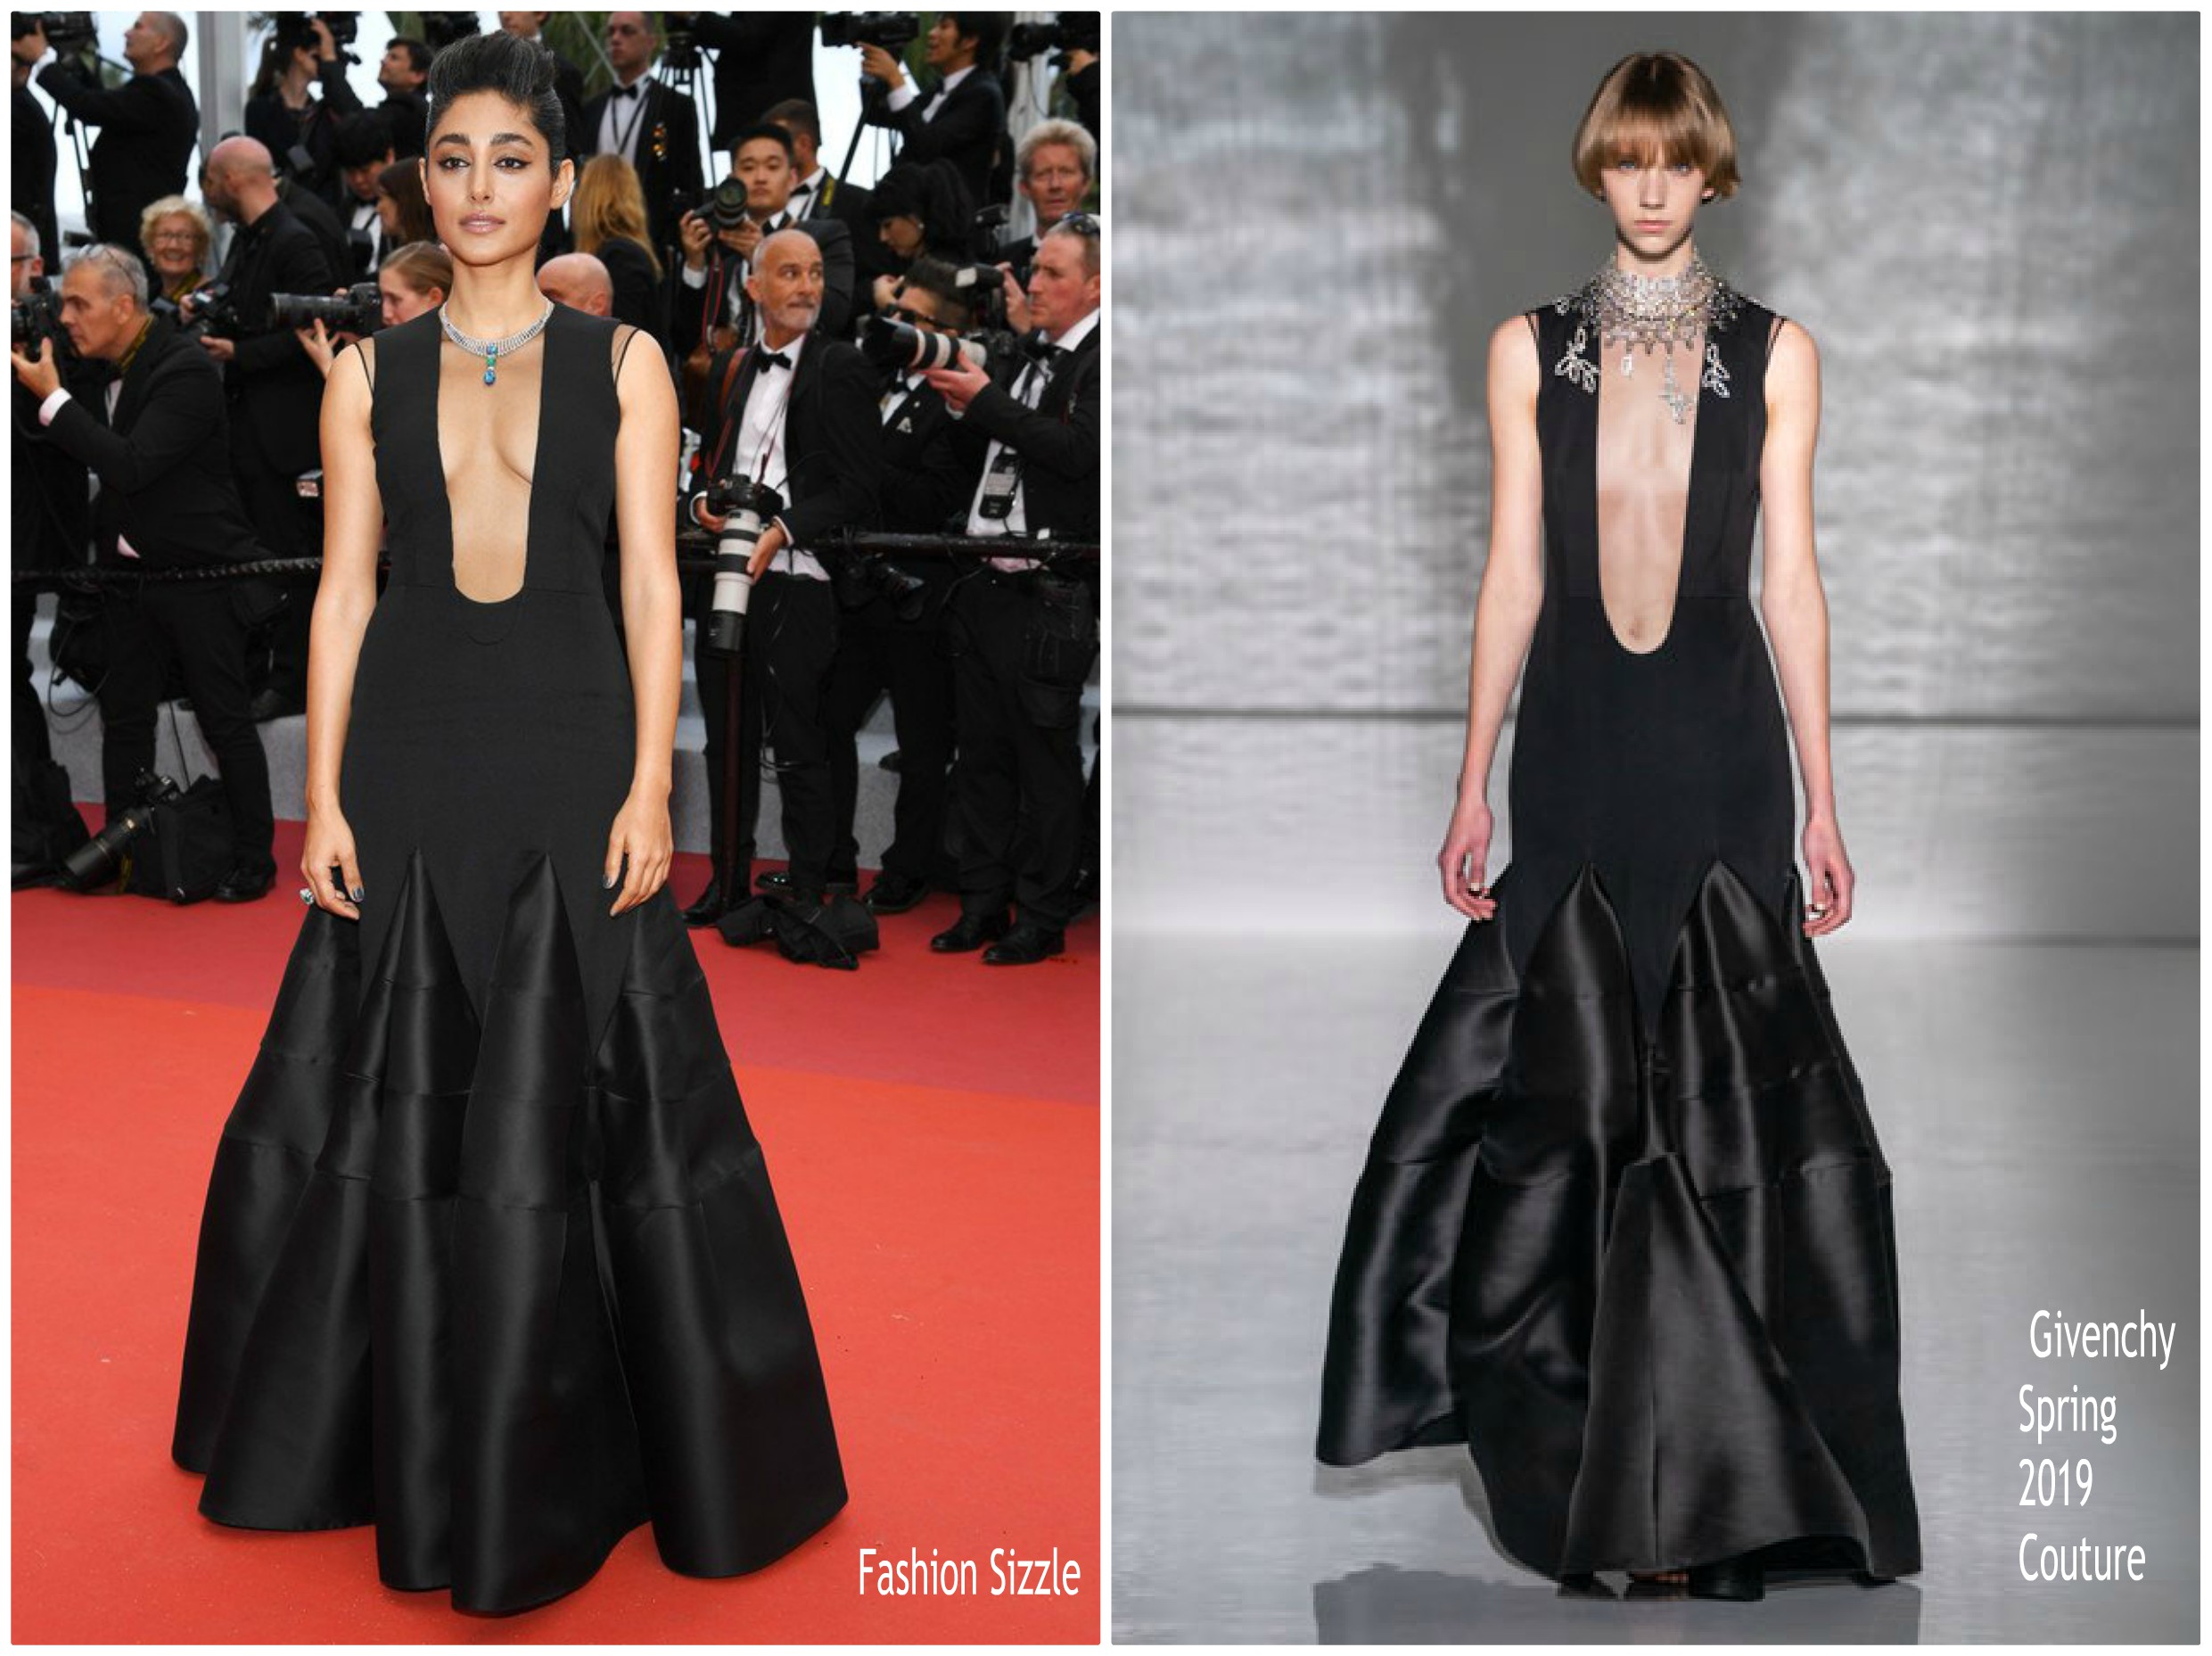 golshifteh-farahani-in-givenchy-haute-couture-the-dead-dont-die-cannes-film-festival-premiere-opening-ceremony